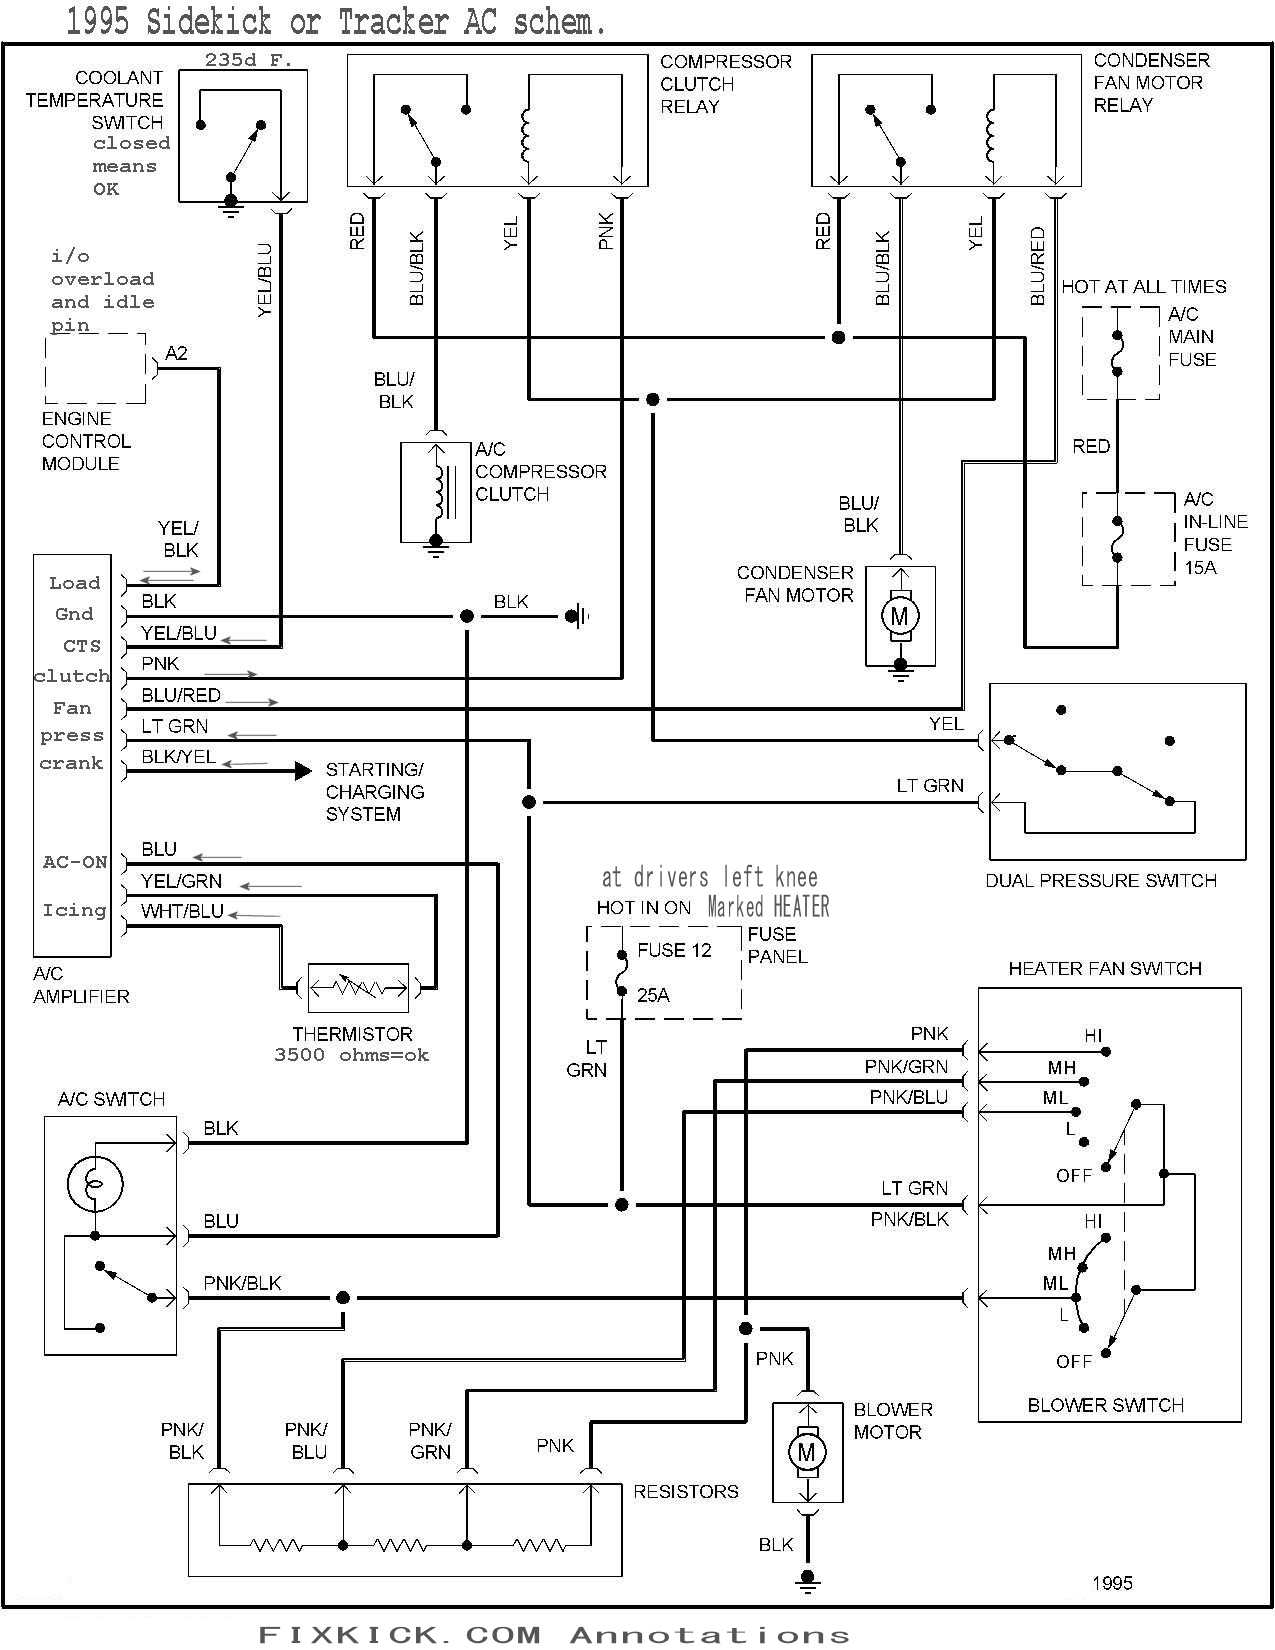 A/C Wiring Diagram from fixkick.com